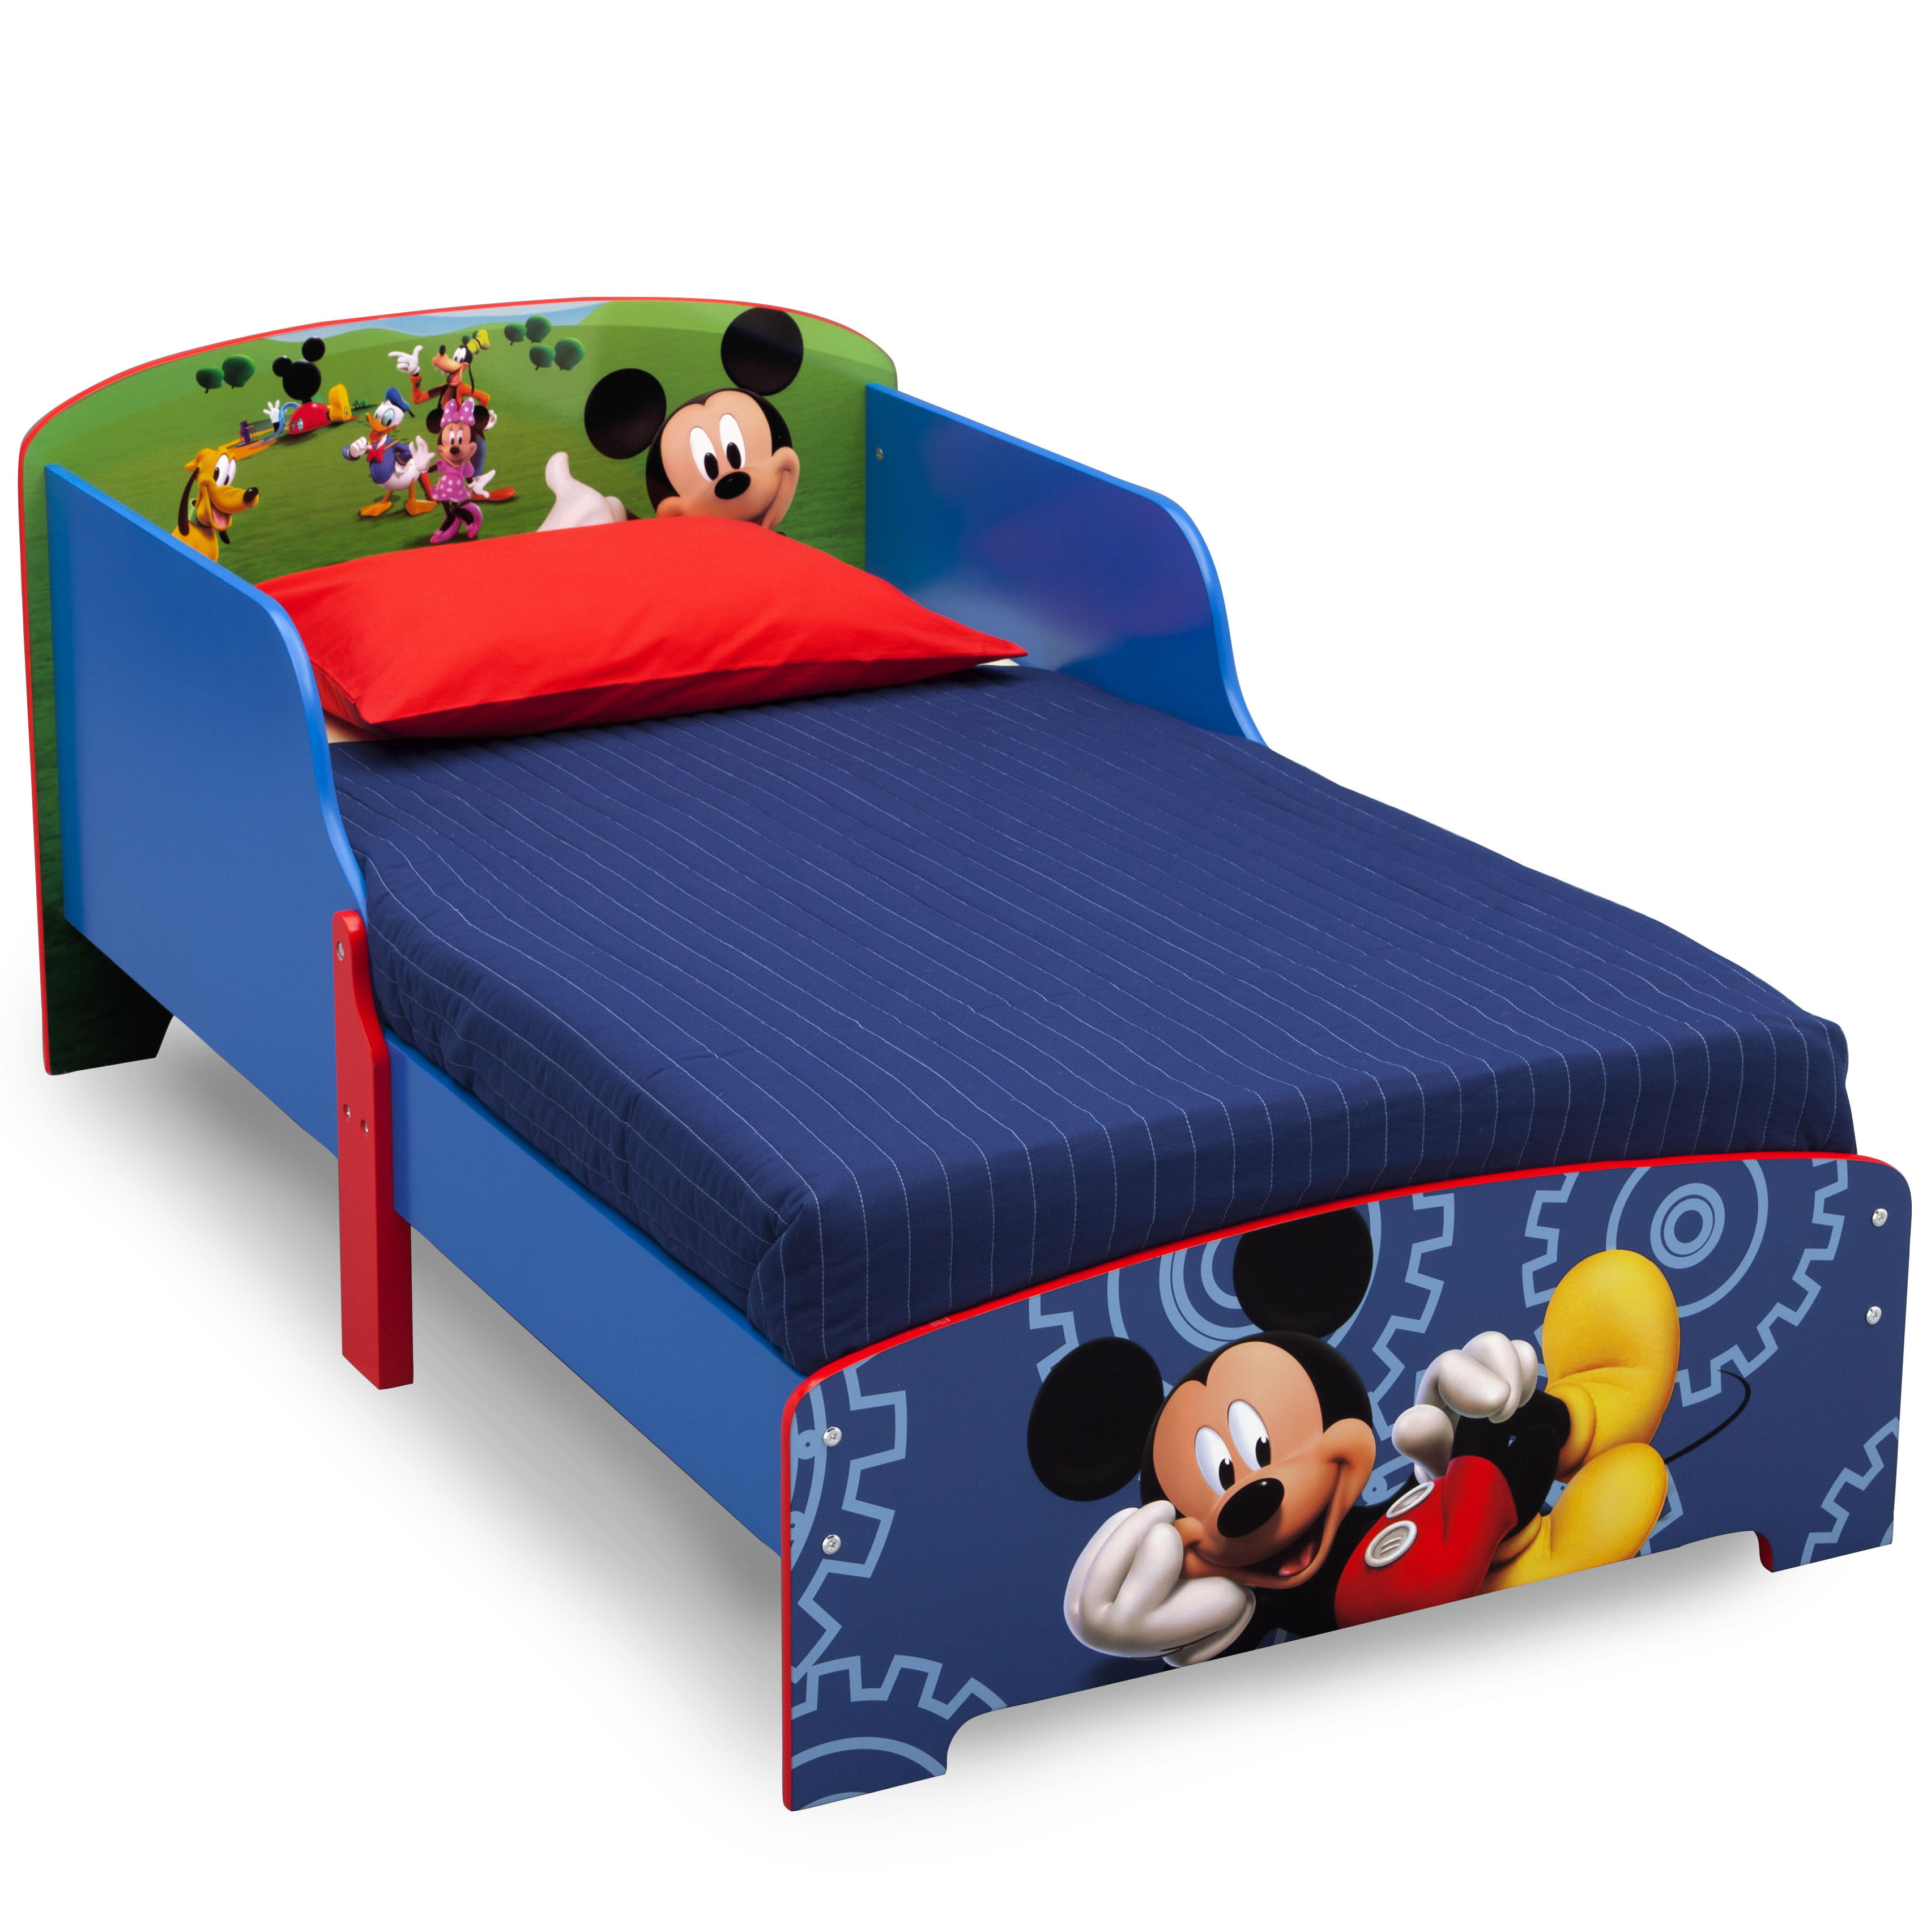 Mickey Mouse Wooden Toddler Bed - Walmart.com